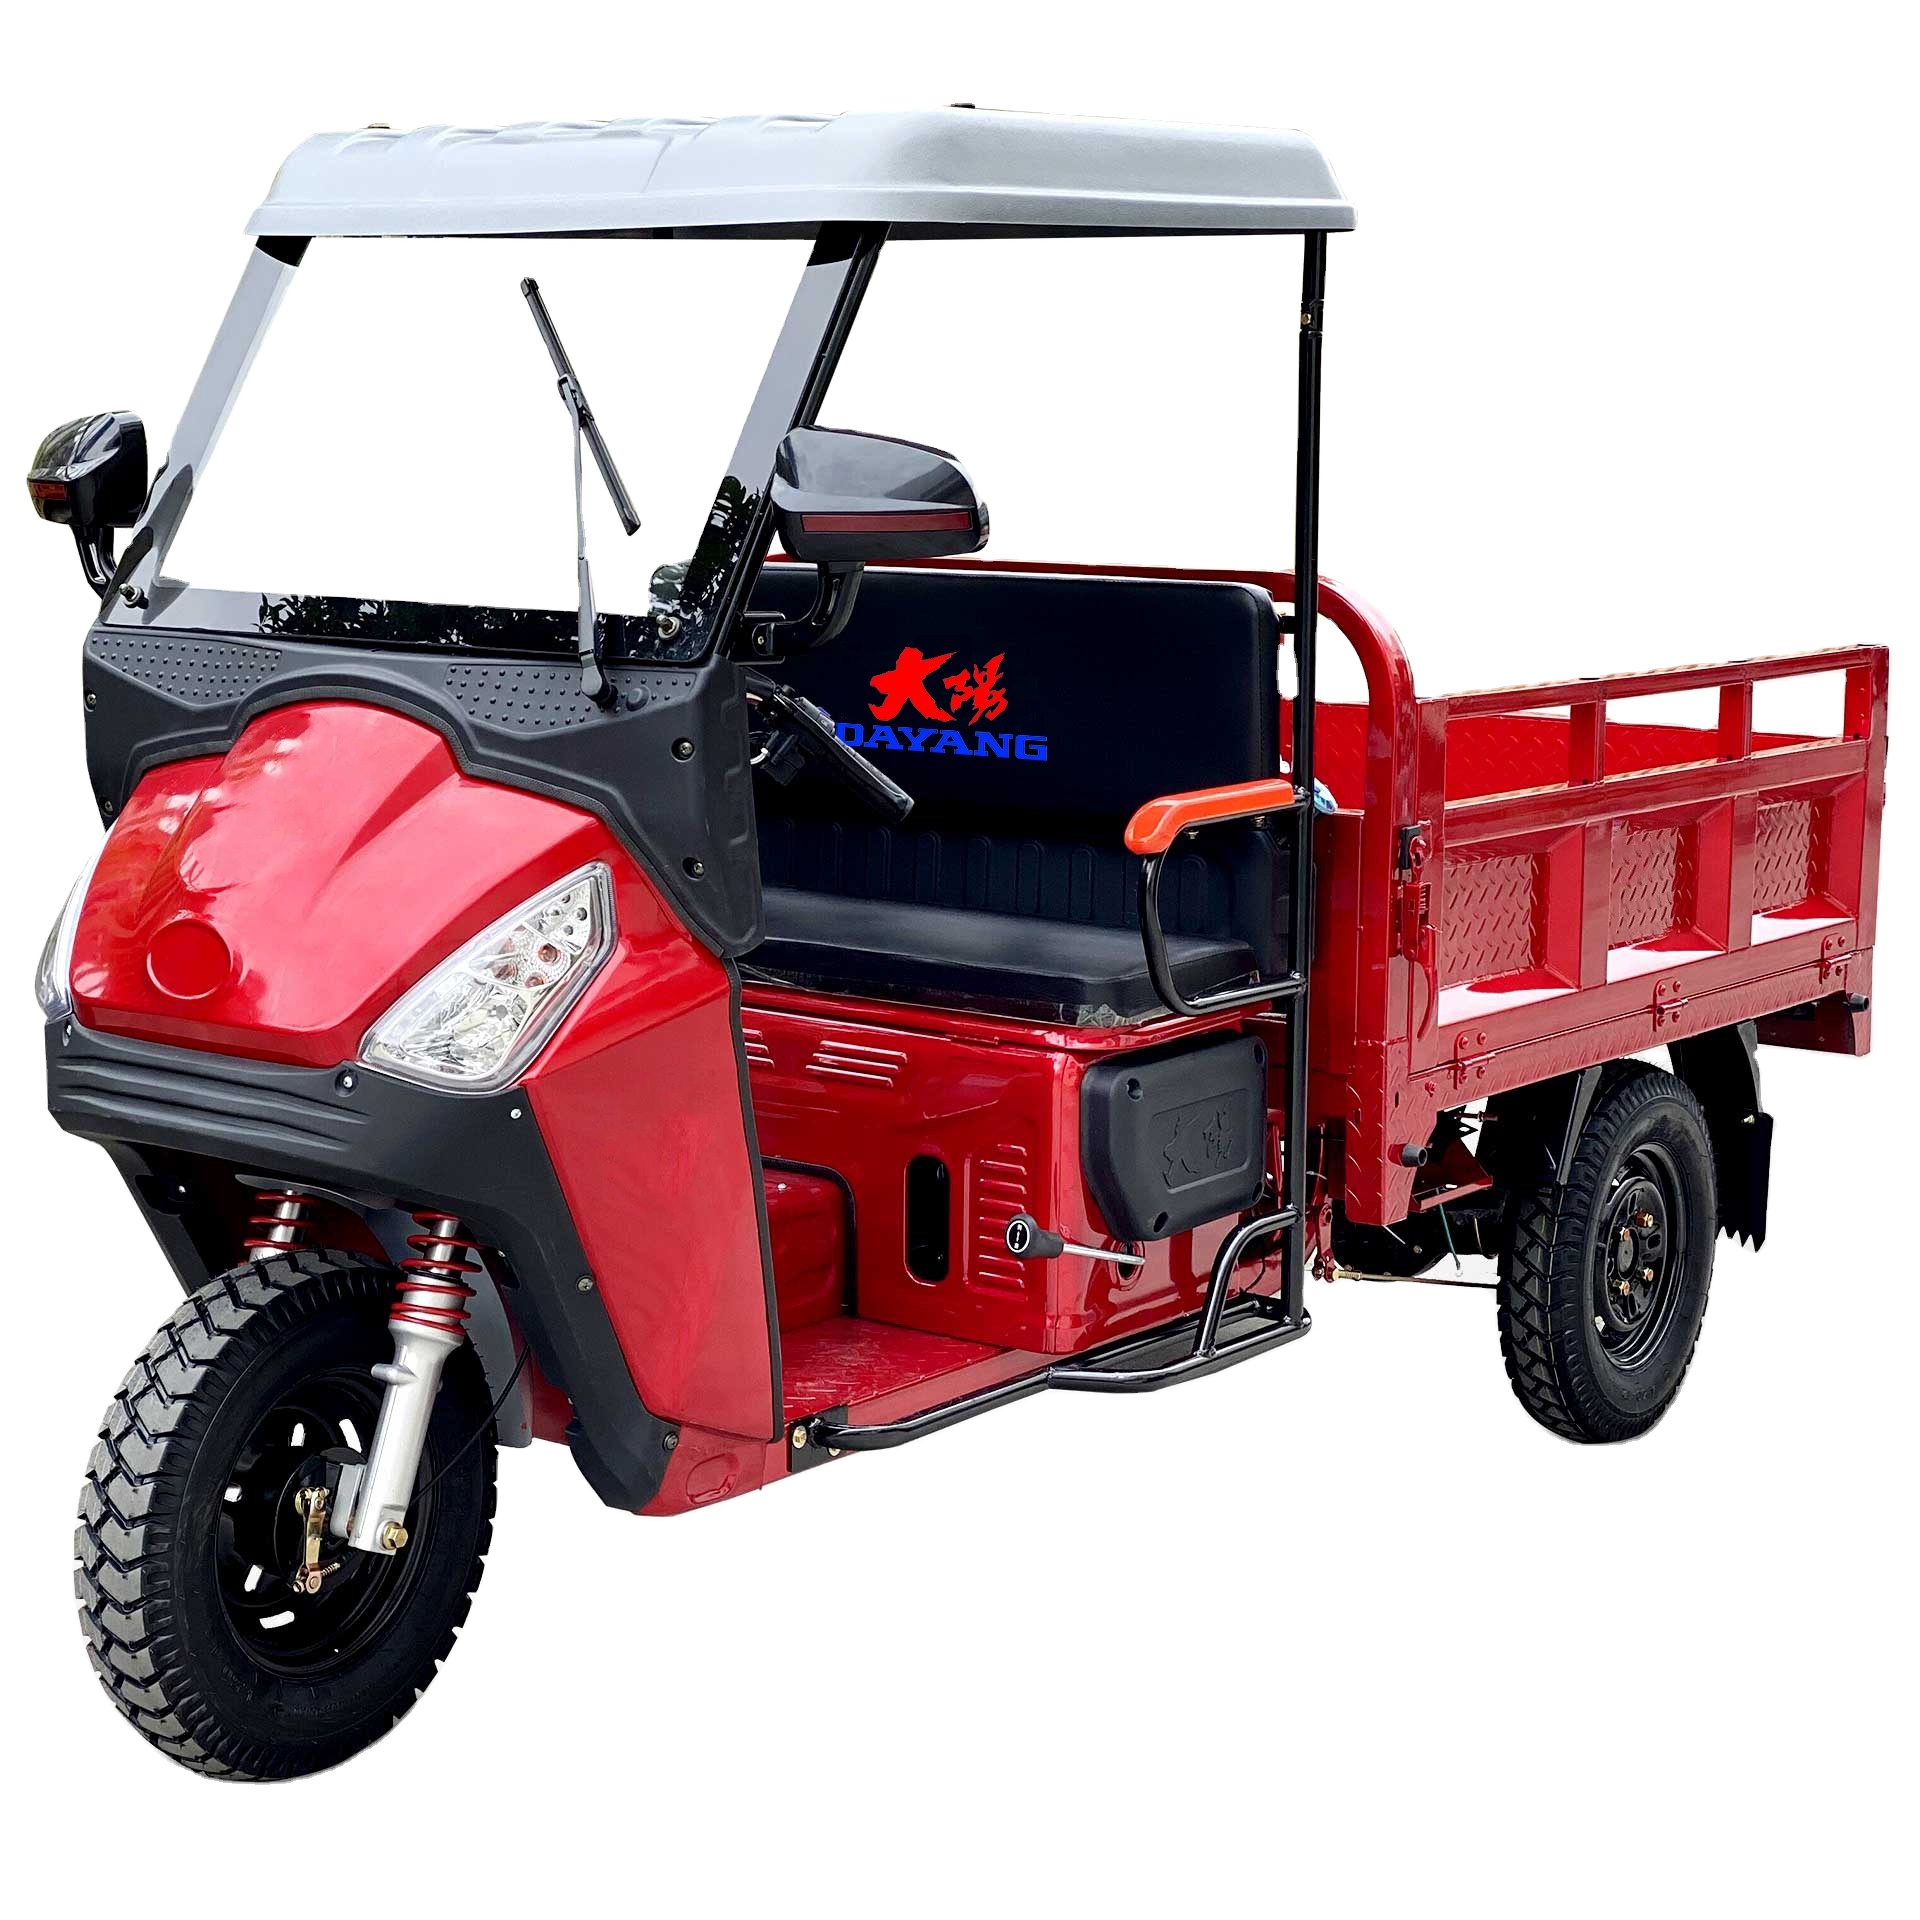 DAYANG Brand Big Space Cheap Good Quality zambia cargo motor tricycle trimoto delivery motorized tricycles